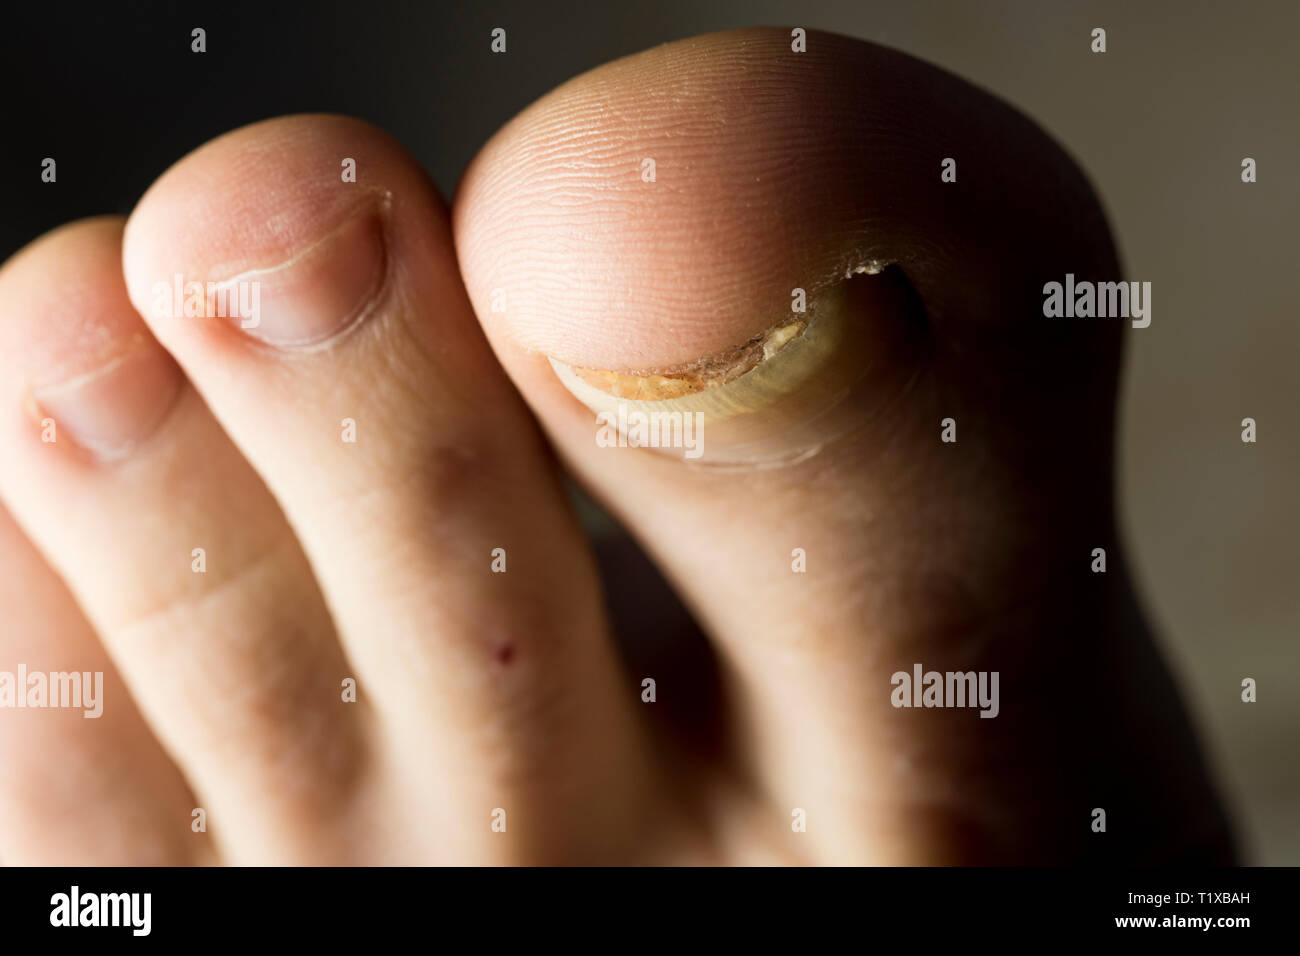 Toenails close up. Feet with toenail damage and trauma up close. Foot injury. Bacterial fungal infection. Stock Photo